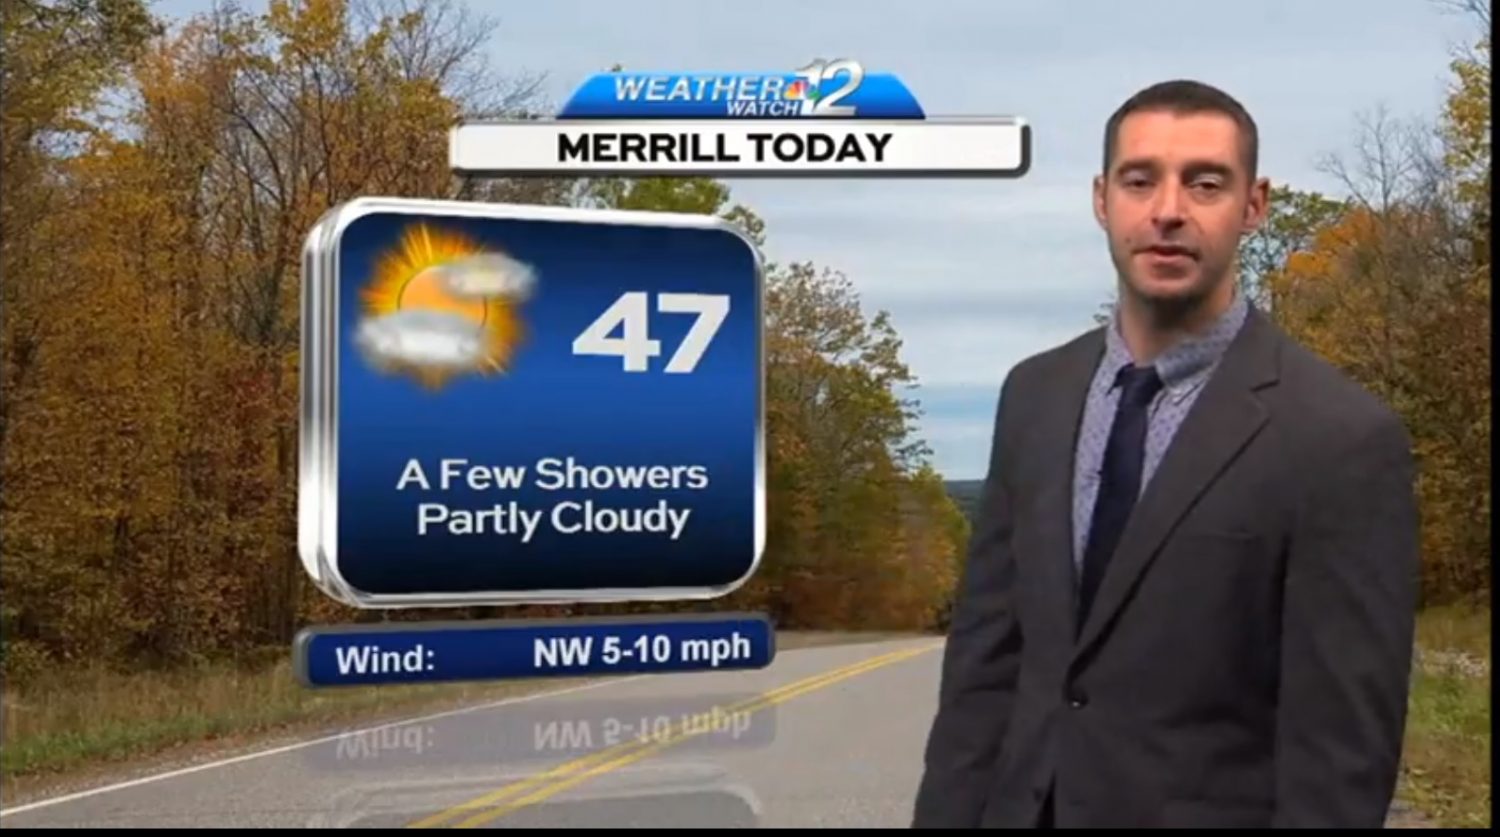 More sun, but still quite chilly for Wednesday